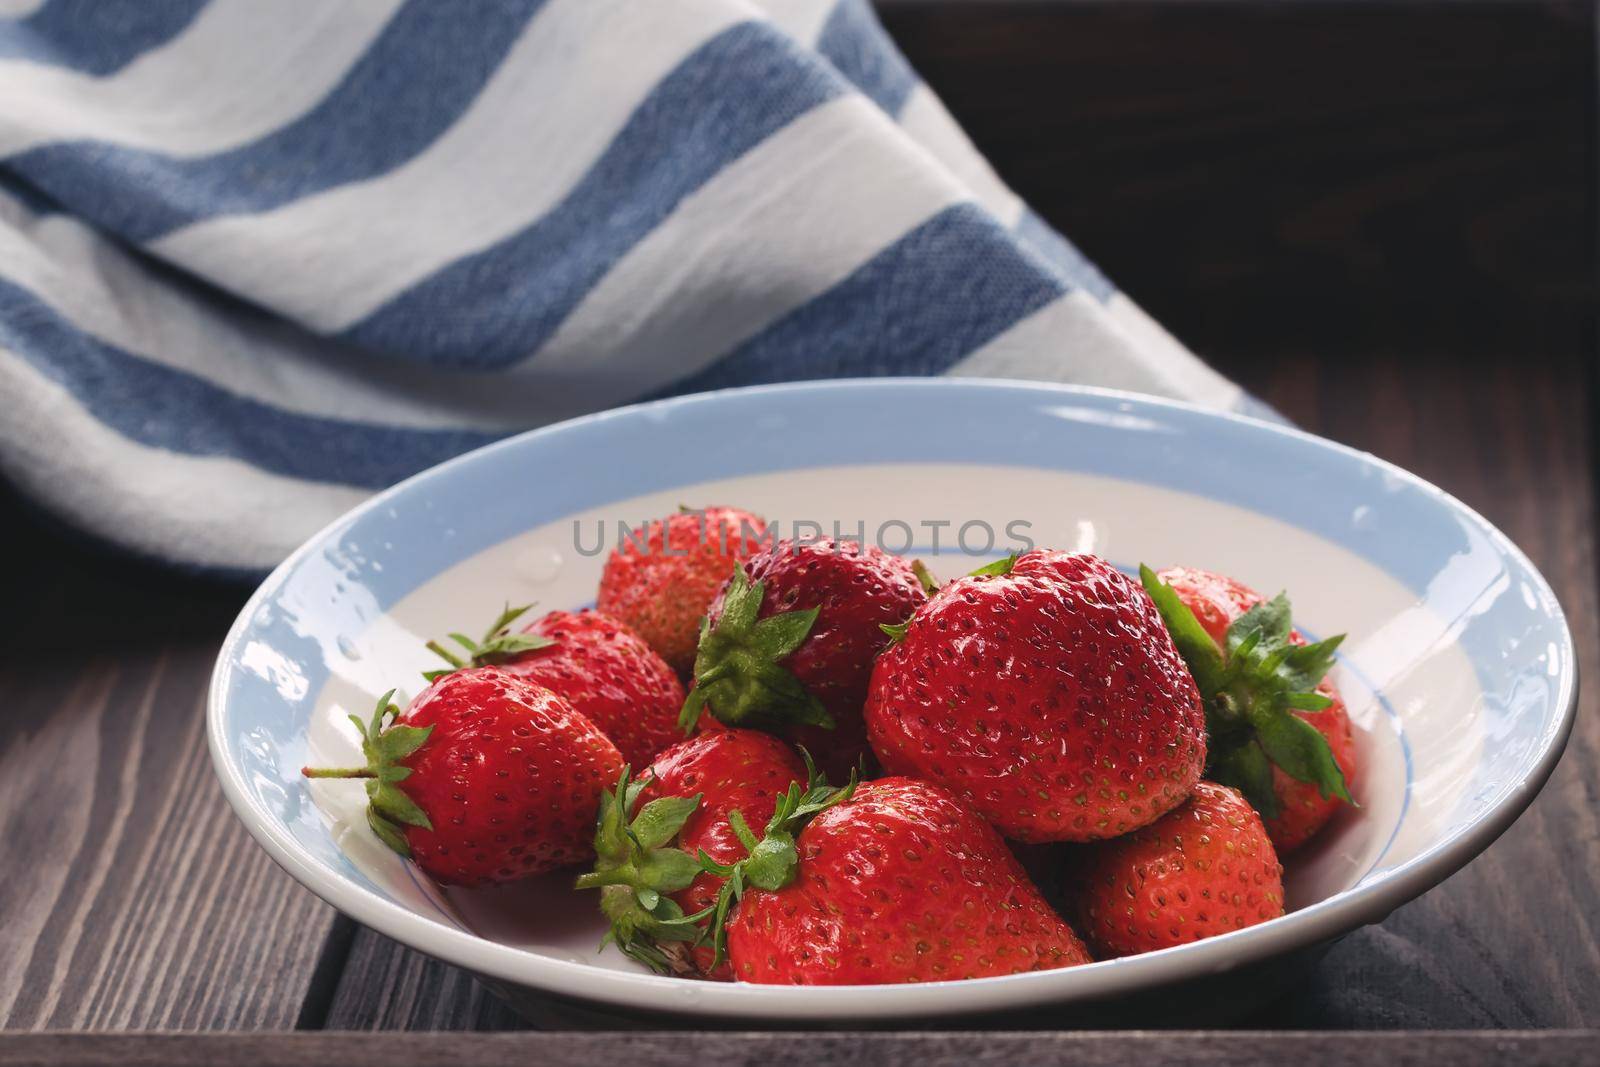 Natural ripe strawberries in a plain white bowl on a dark wooden table.